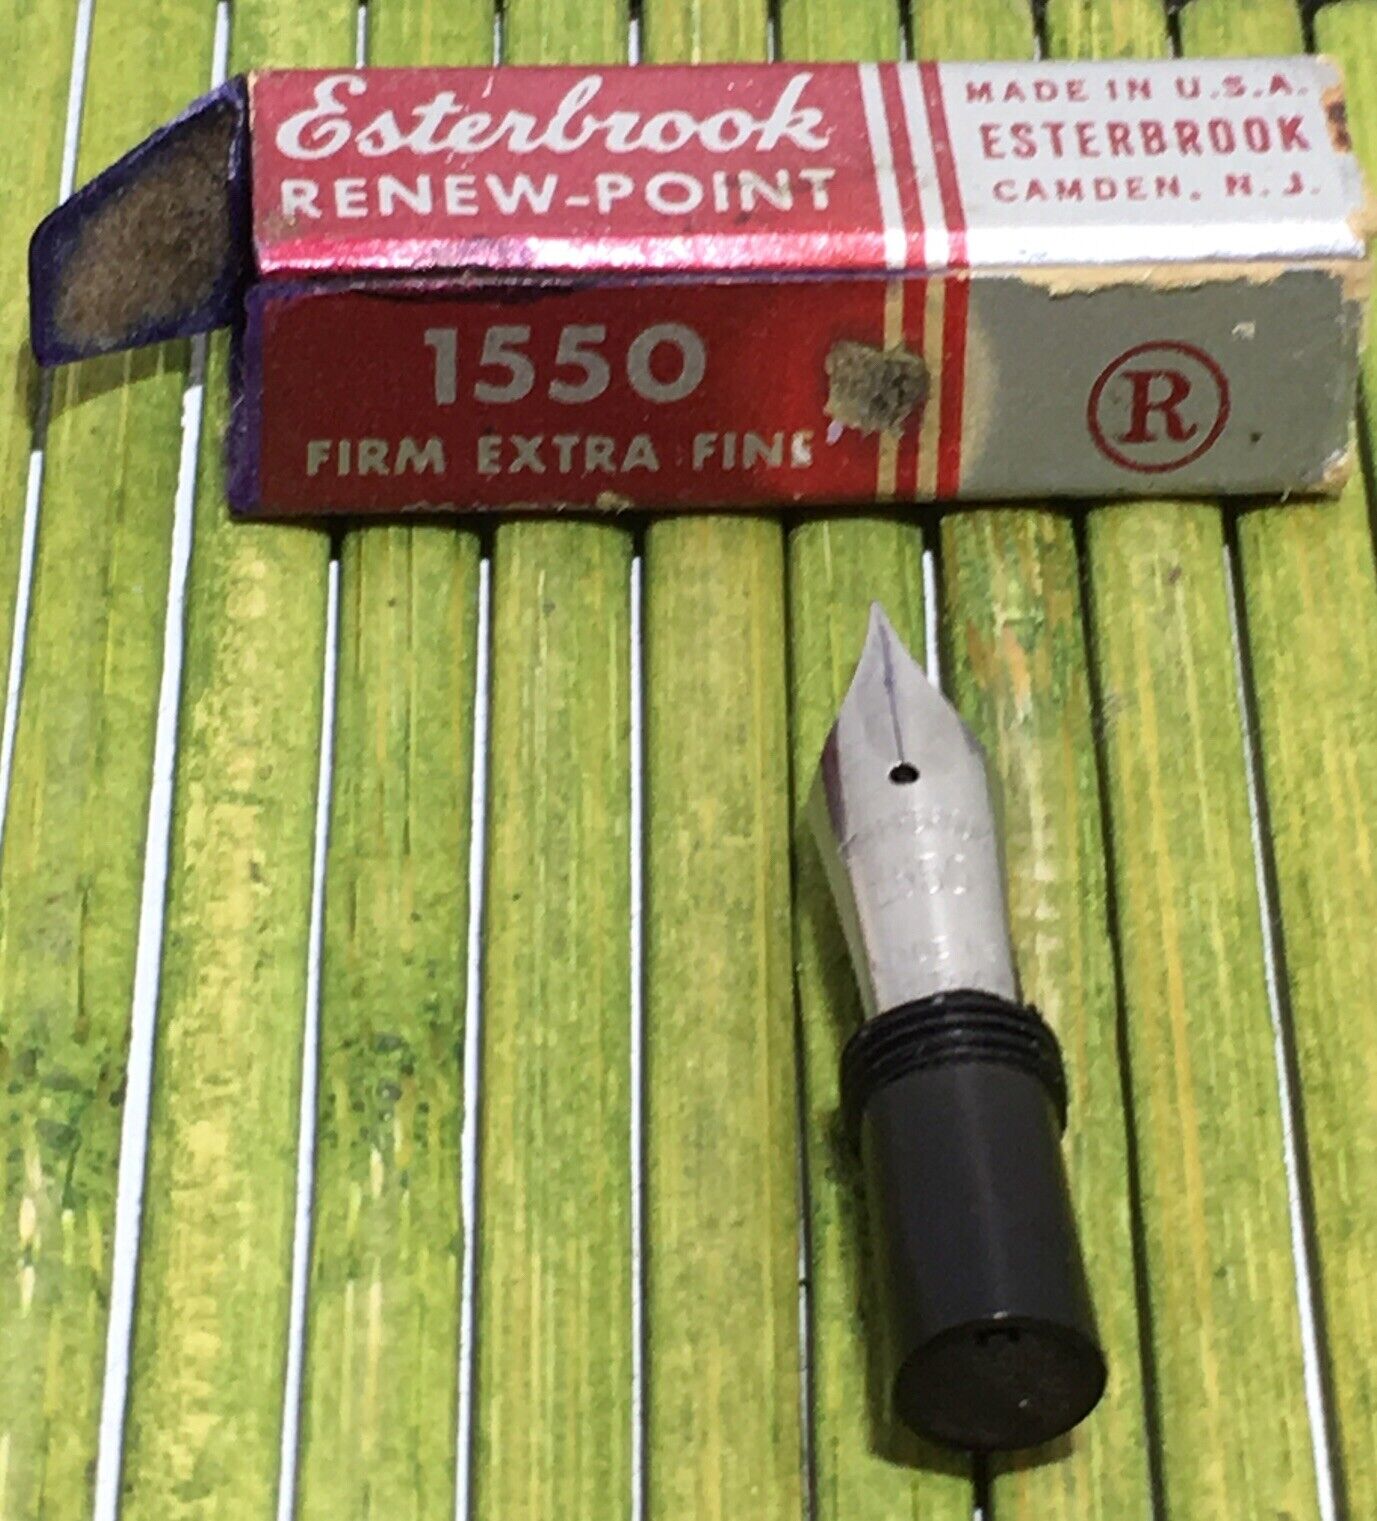 Vintage Esterbrook Renew Point Duracrome 1550 Firm Extra Fine Bookkeeping Nib